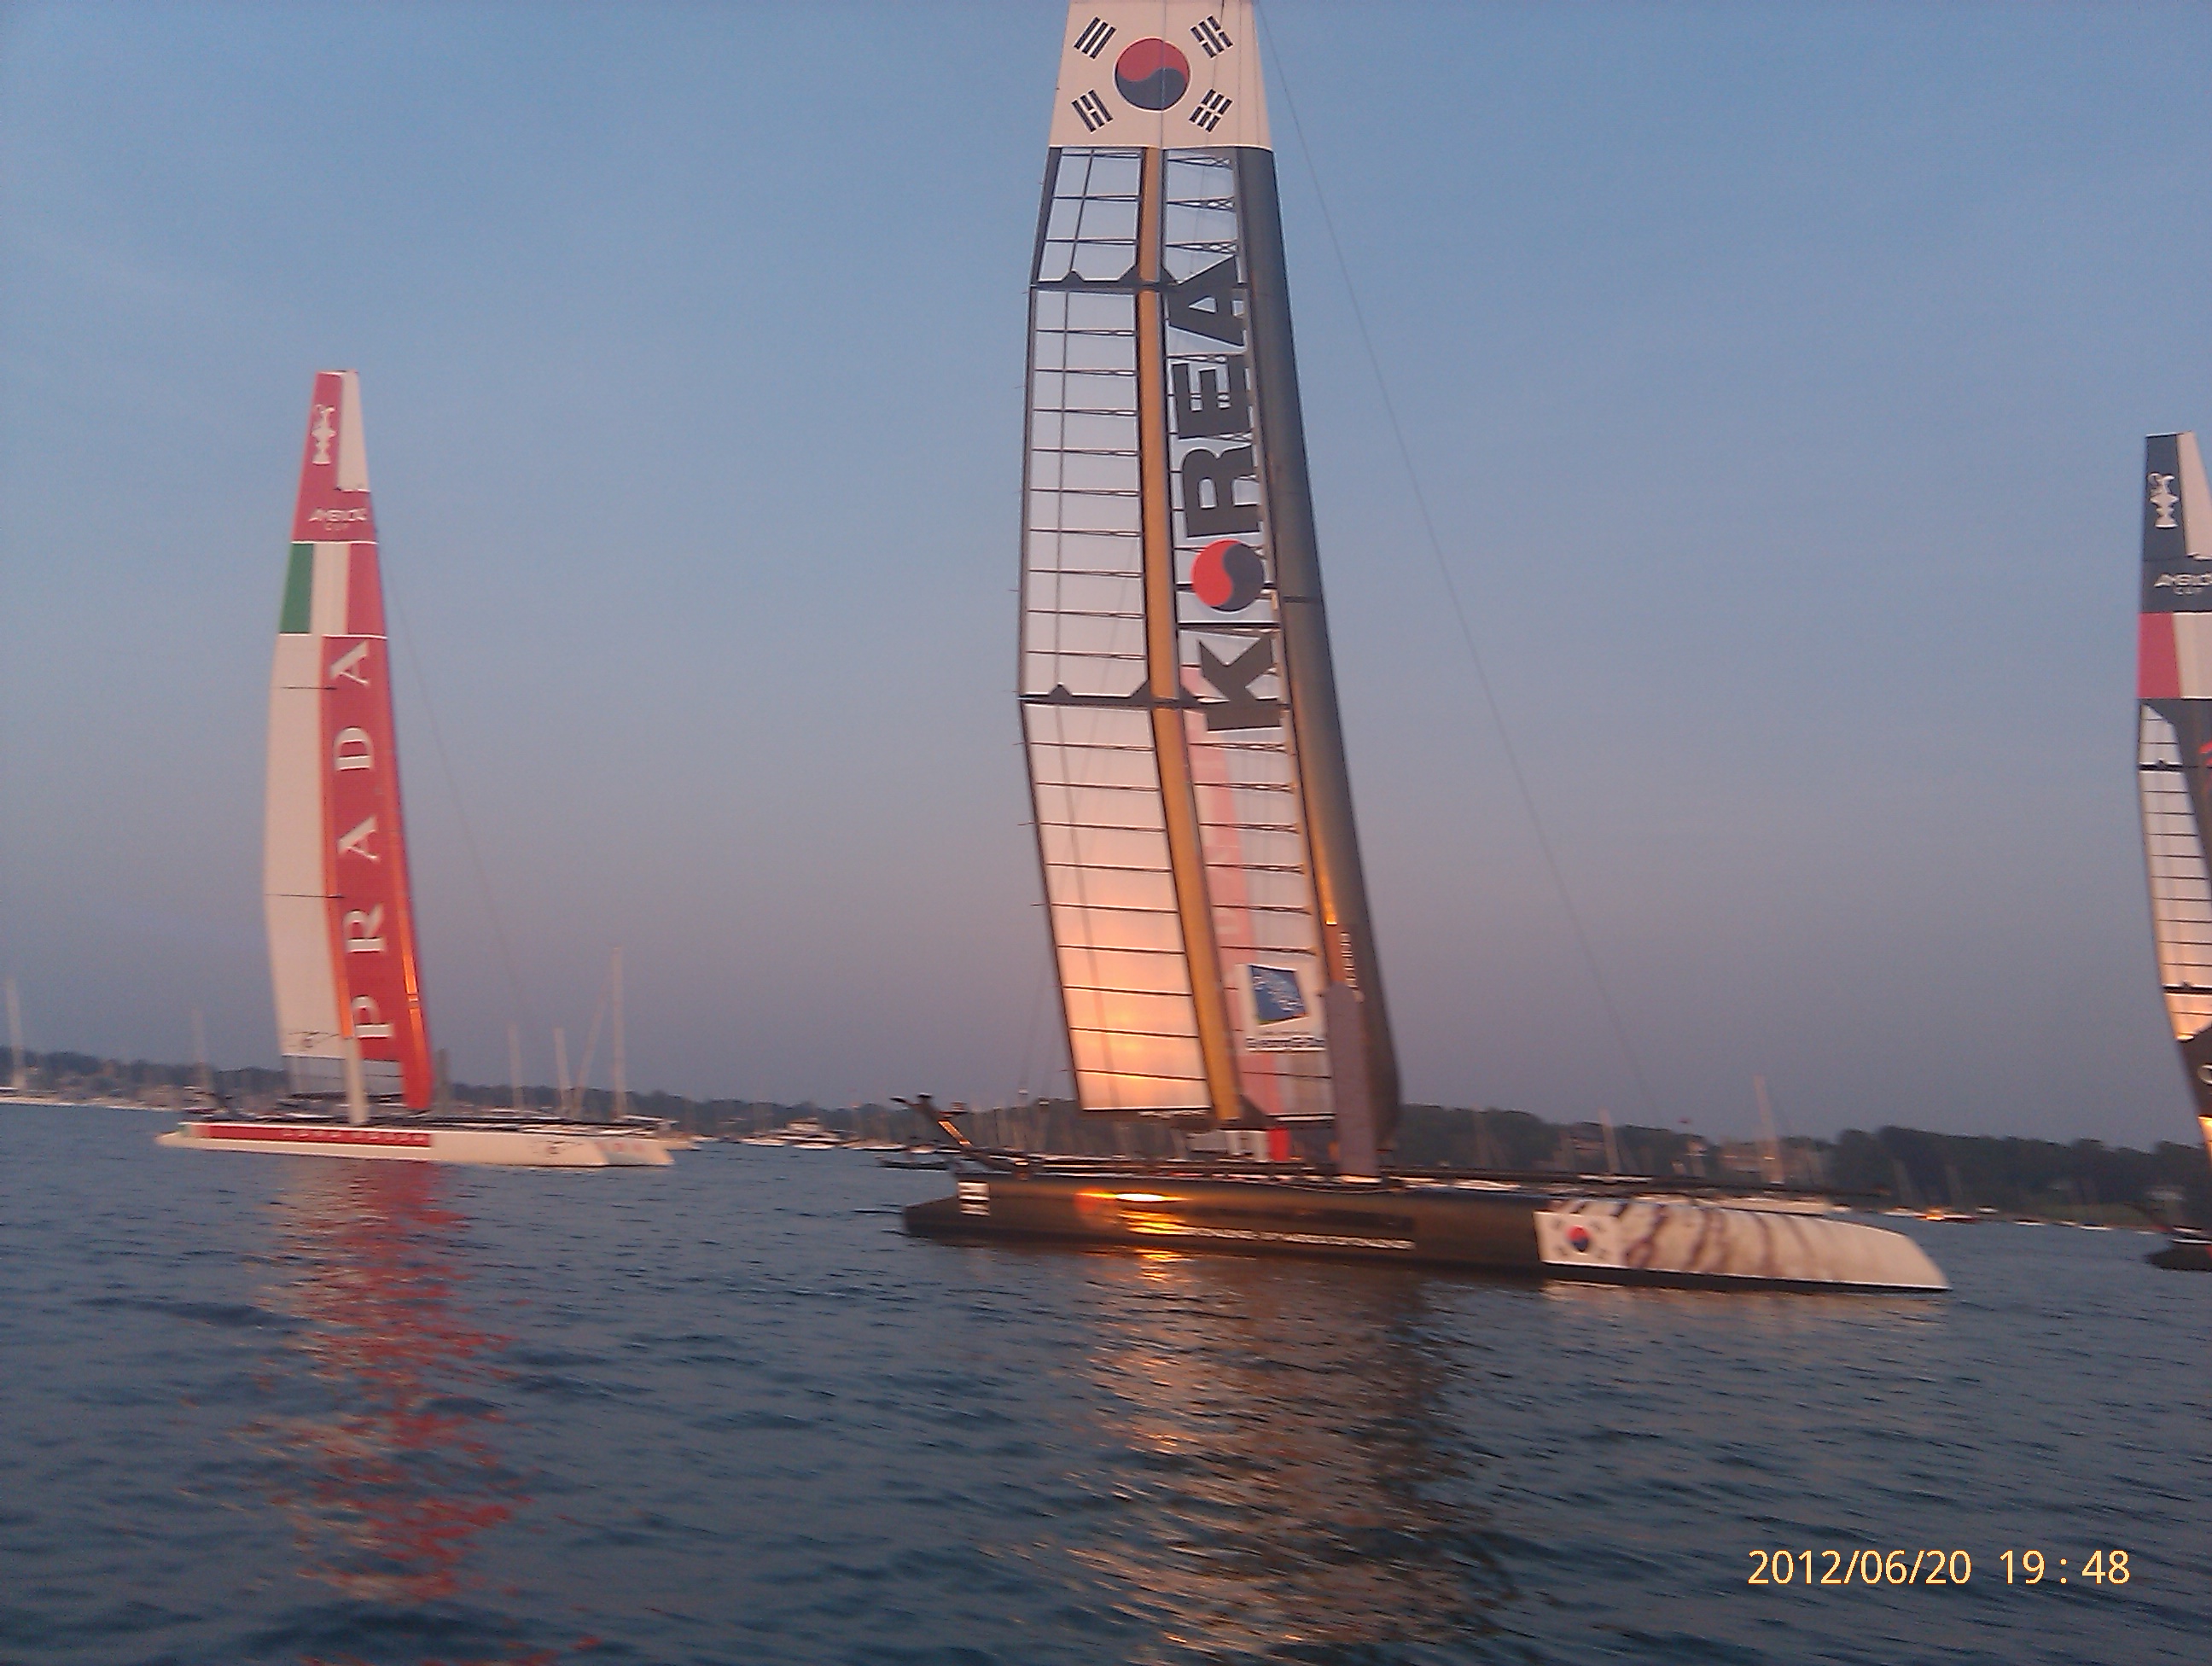 New Americas Cup Boats